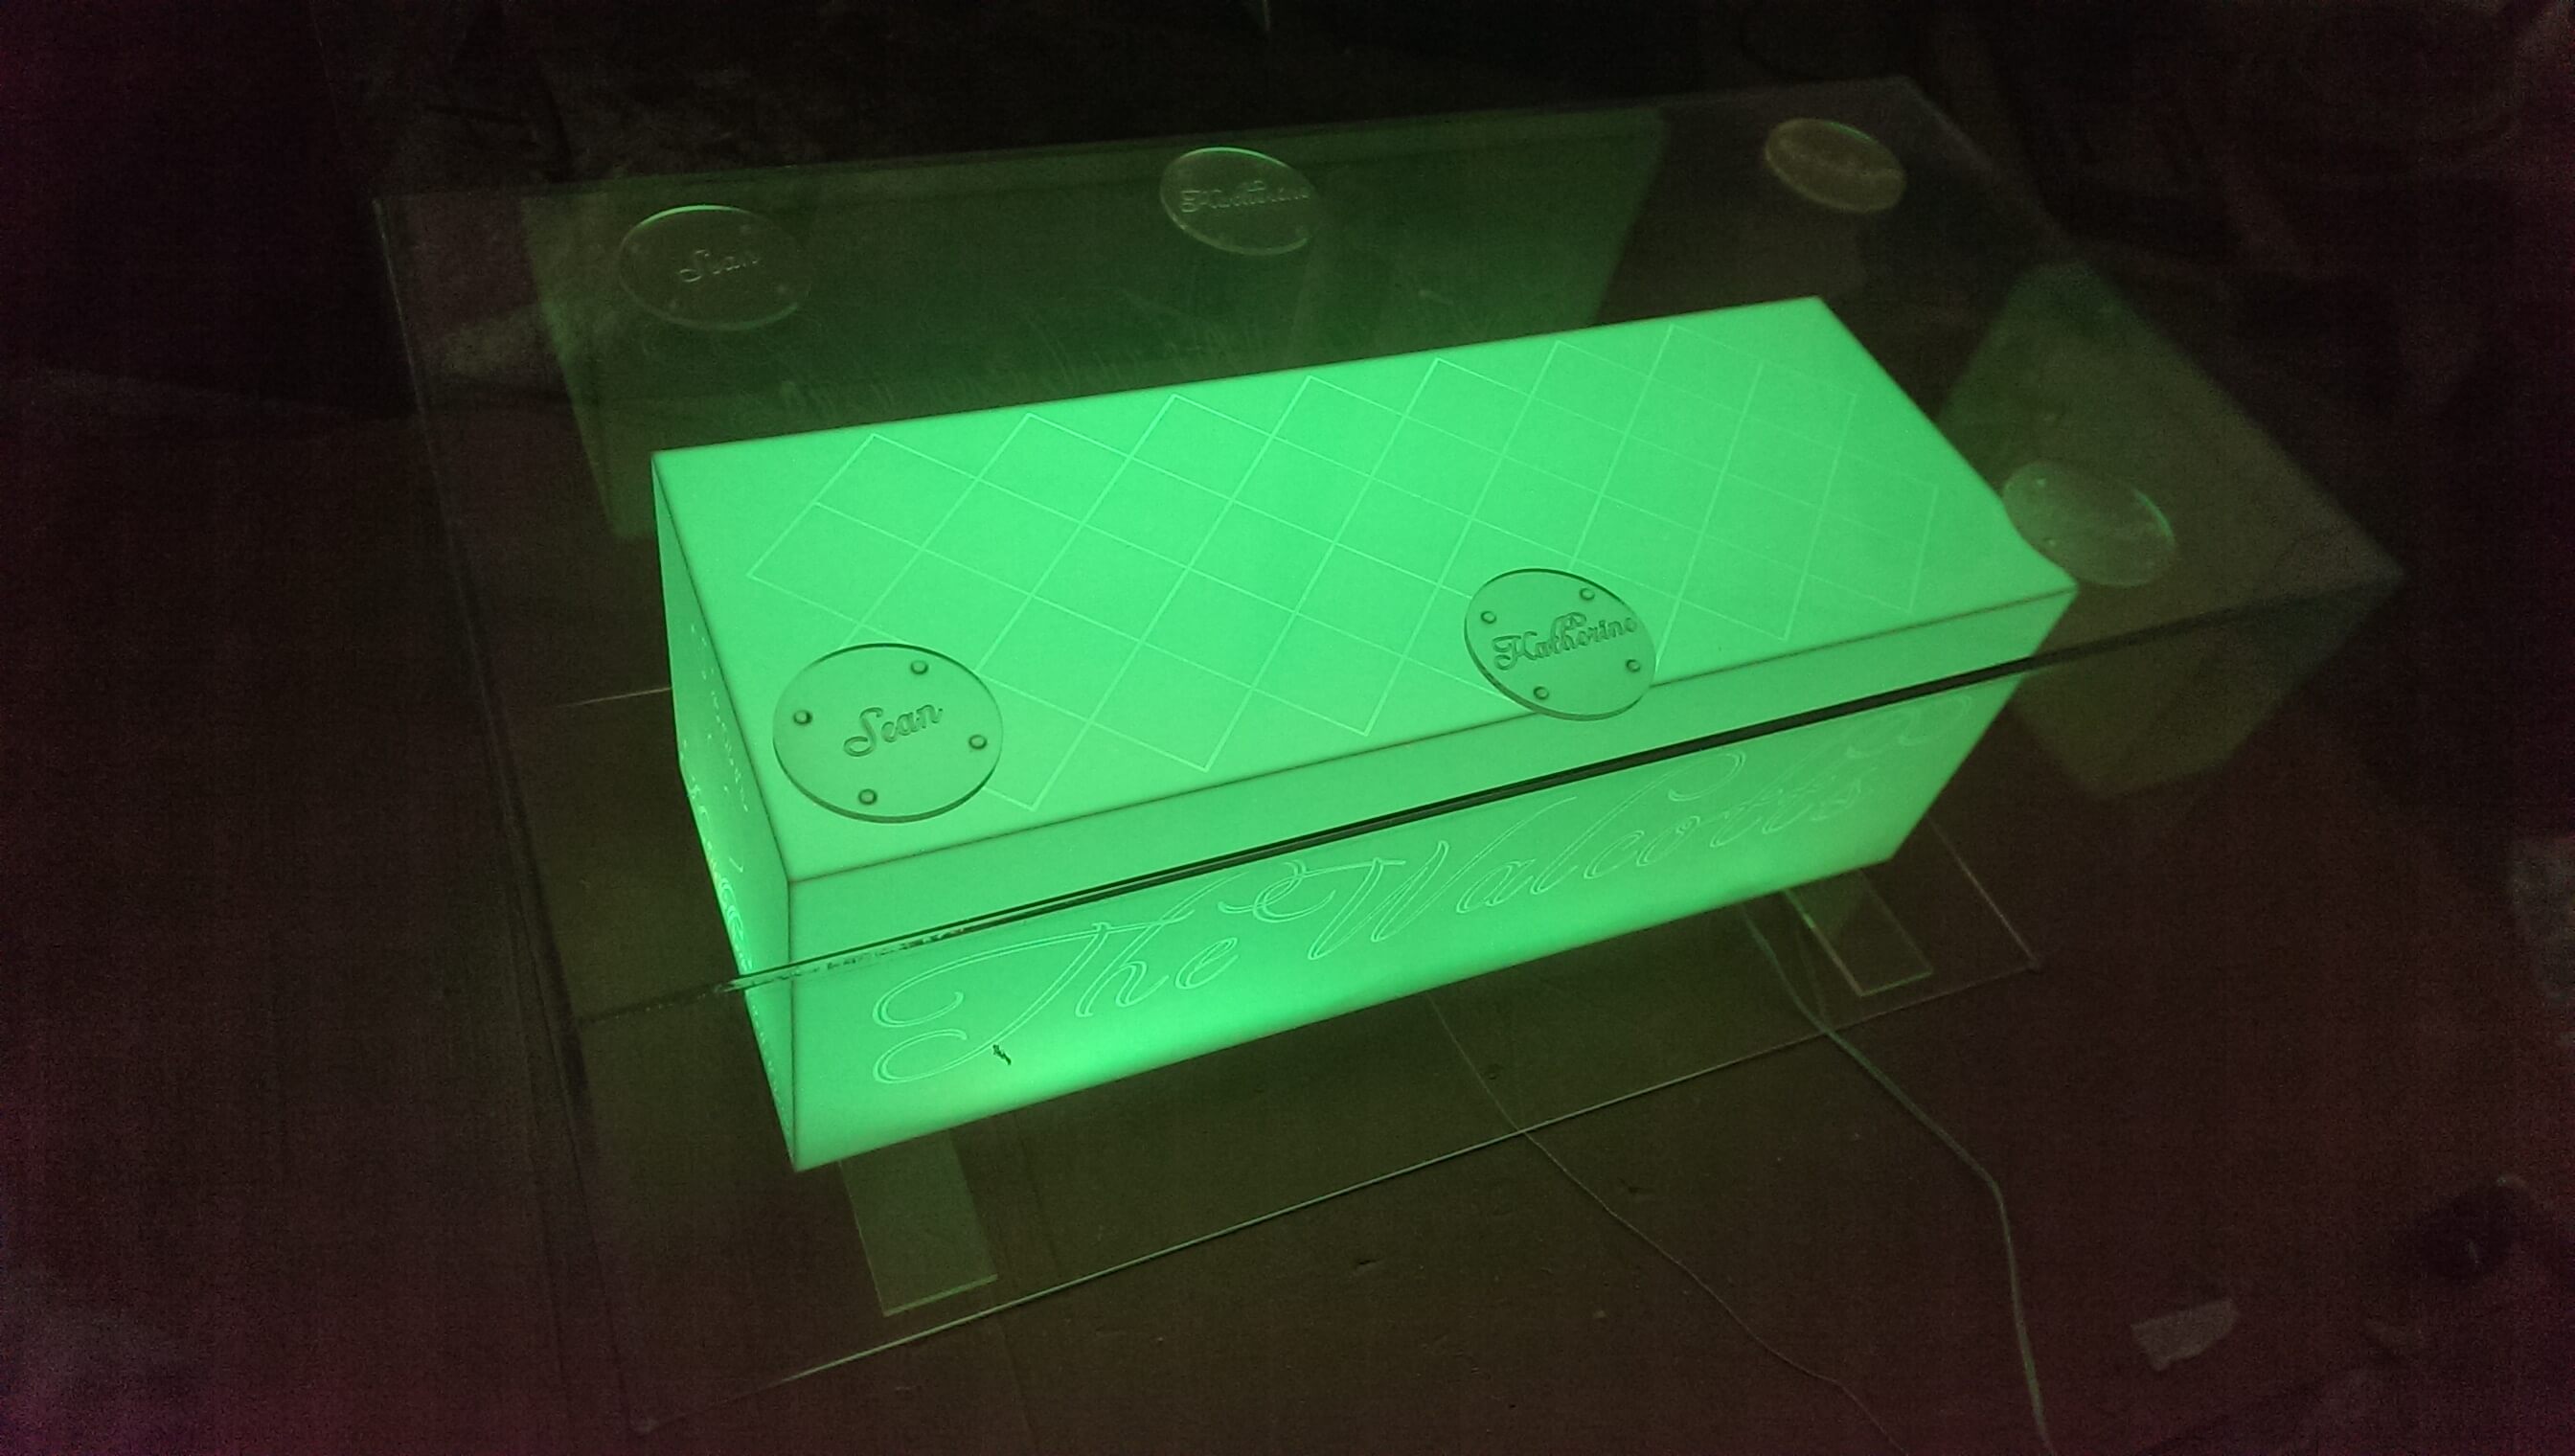 Custom engraved Acrylic Table with lighting effects